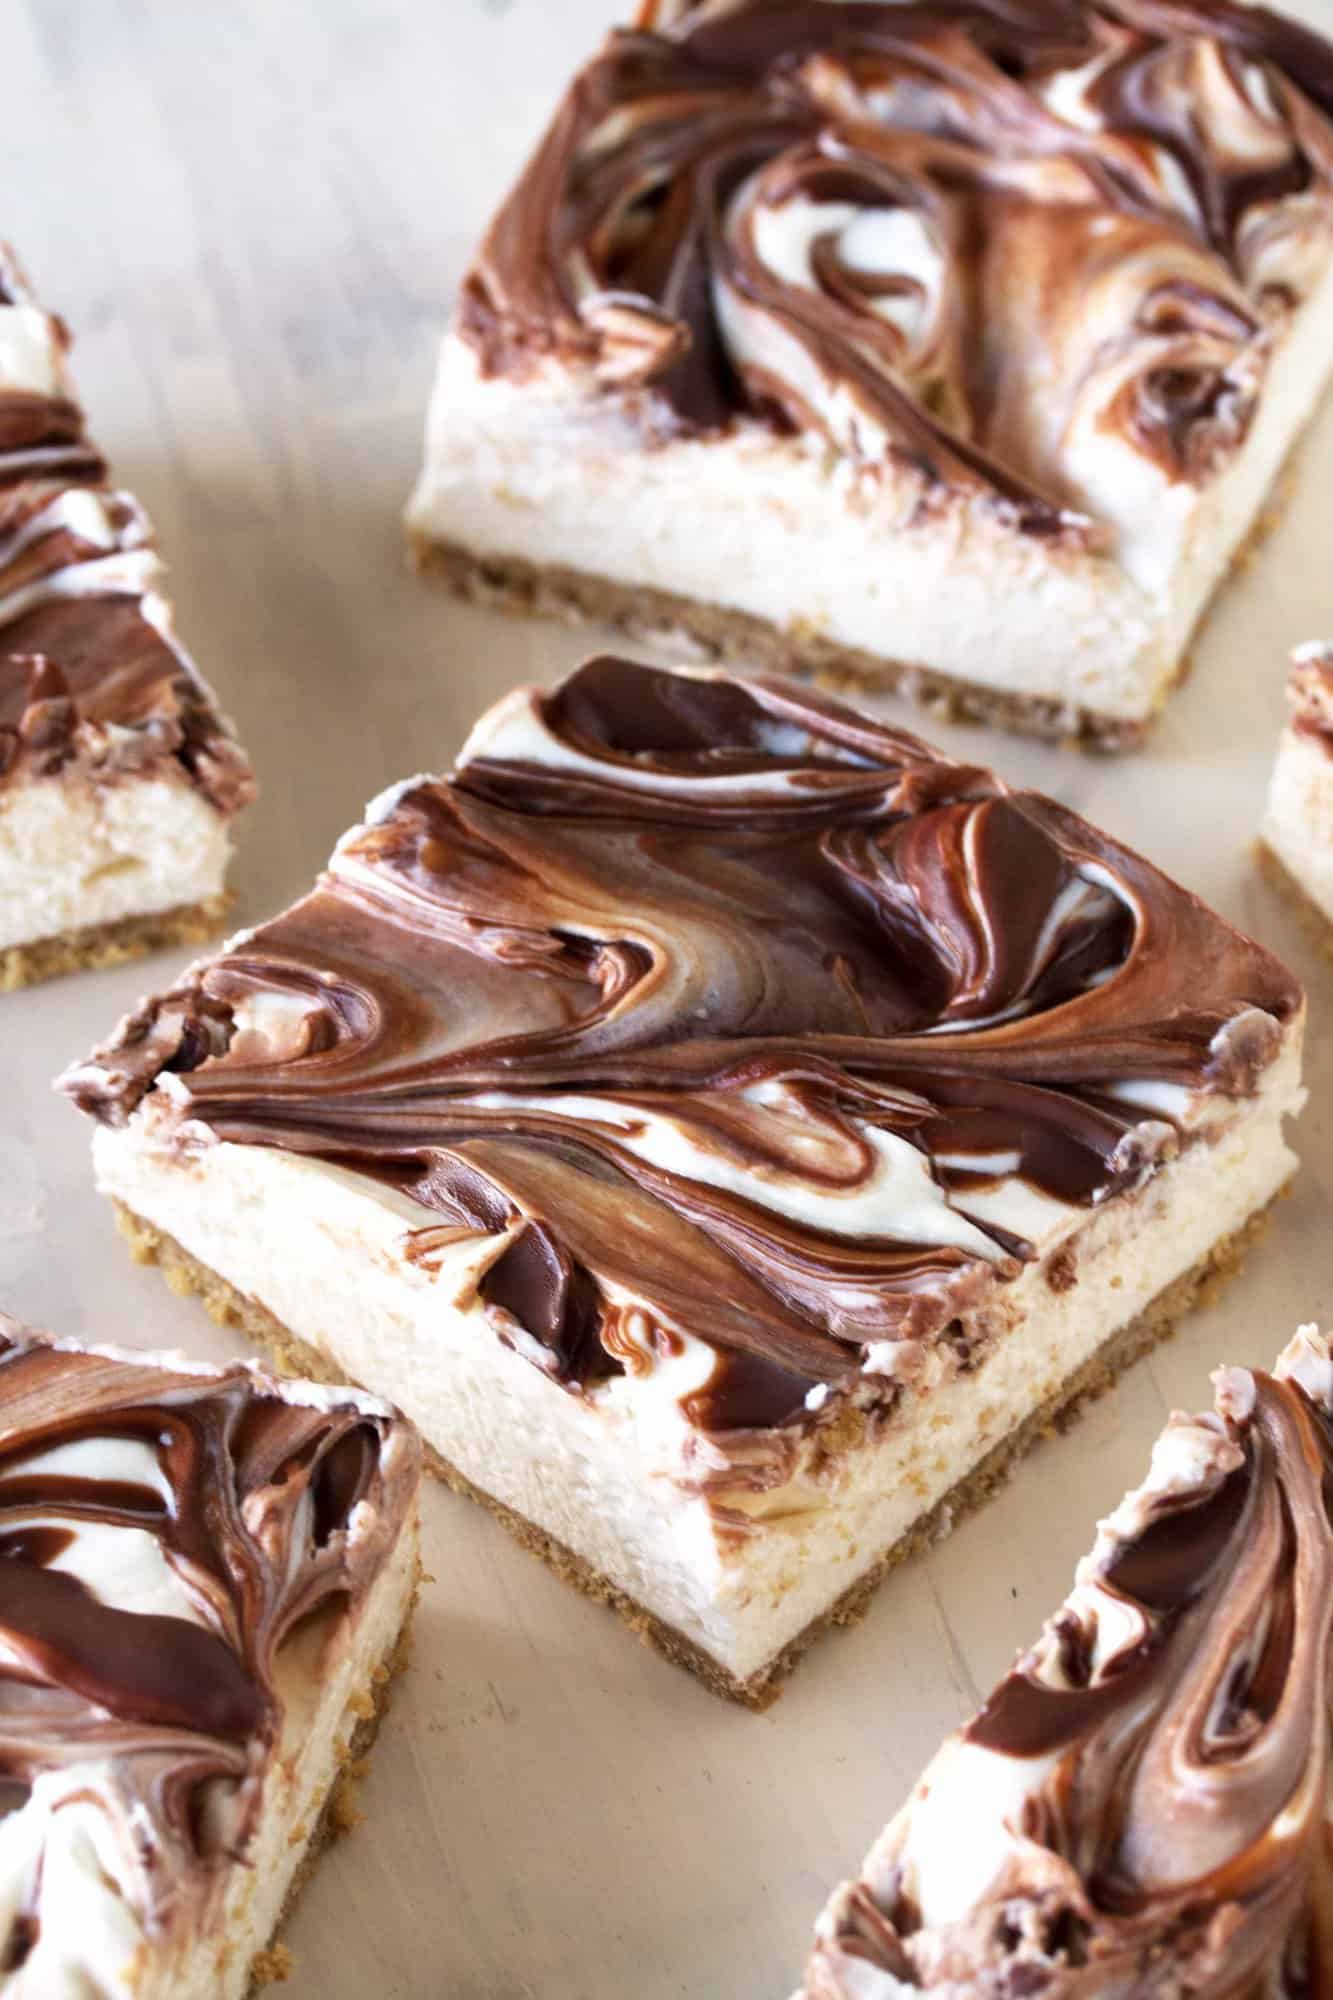 Light and fluffy cheesecake swirled with creamy Nutella sits on top of a graham cracker crust. Your tastebuds will swoon over this No Bake Nutella Swirl Cheesecake.